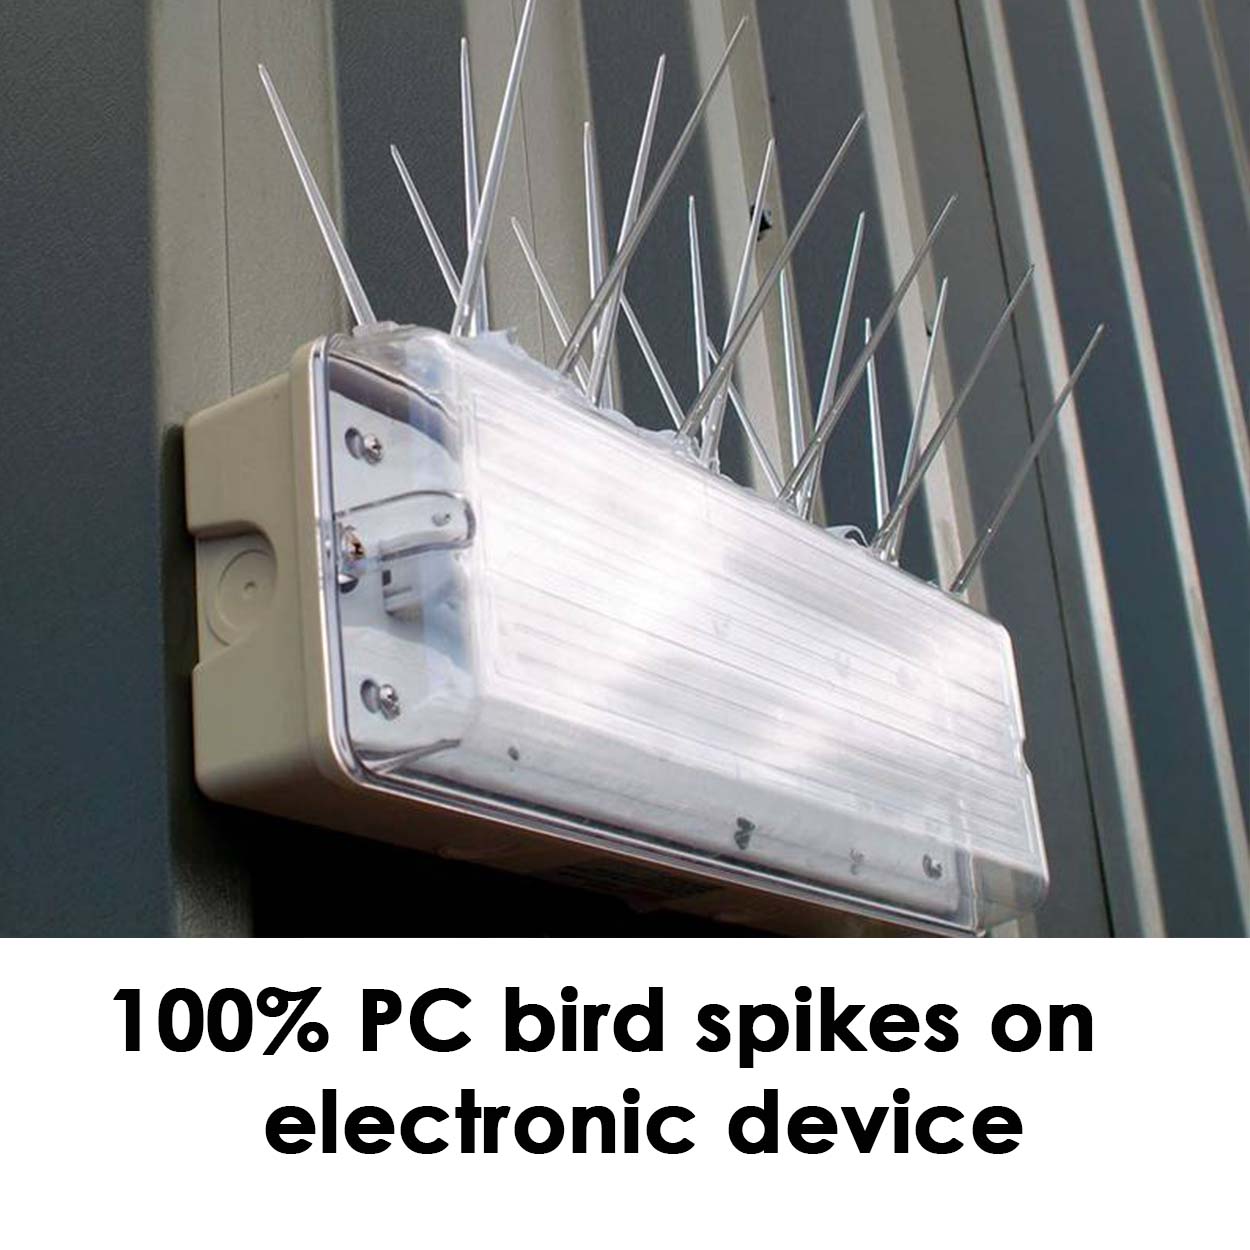 100% PC bird spikes on electronic device